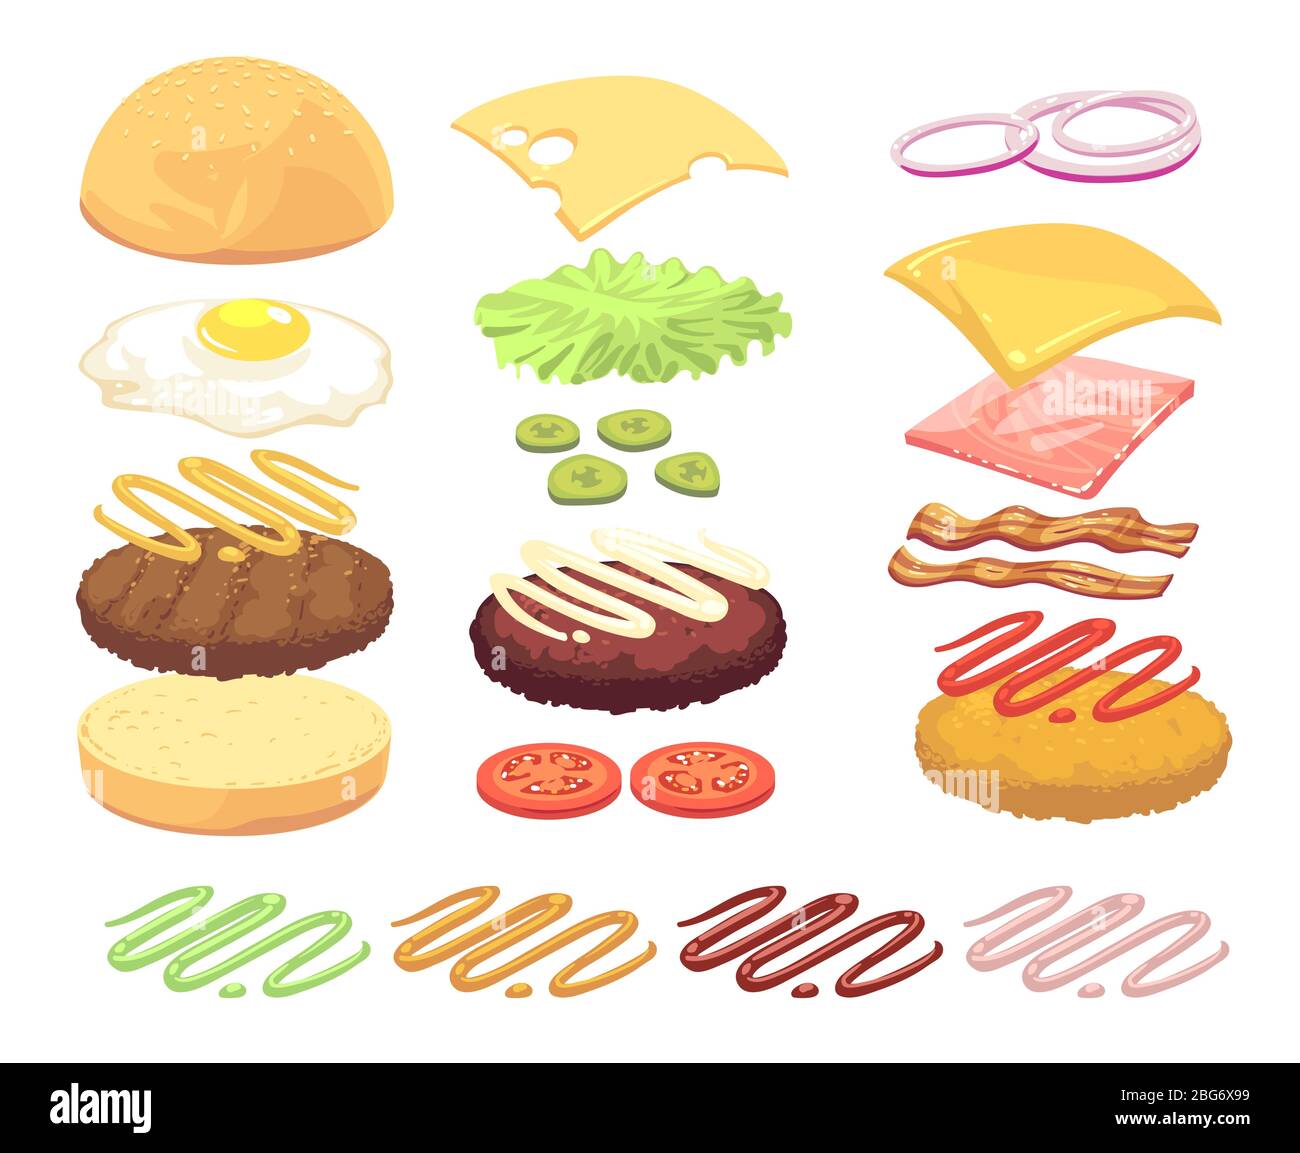 Sandwich and burger food ingredients cartoon vector set. Illustration of cheeseburger and hamburger, ingredient bread and cucumber, cheese and meat Stock Vector